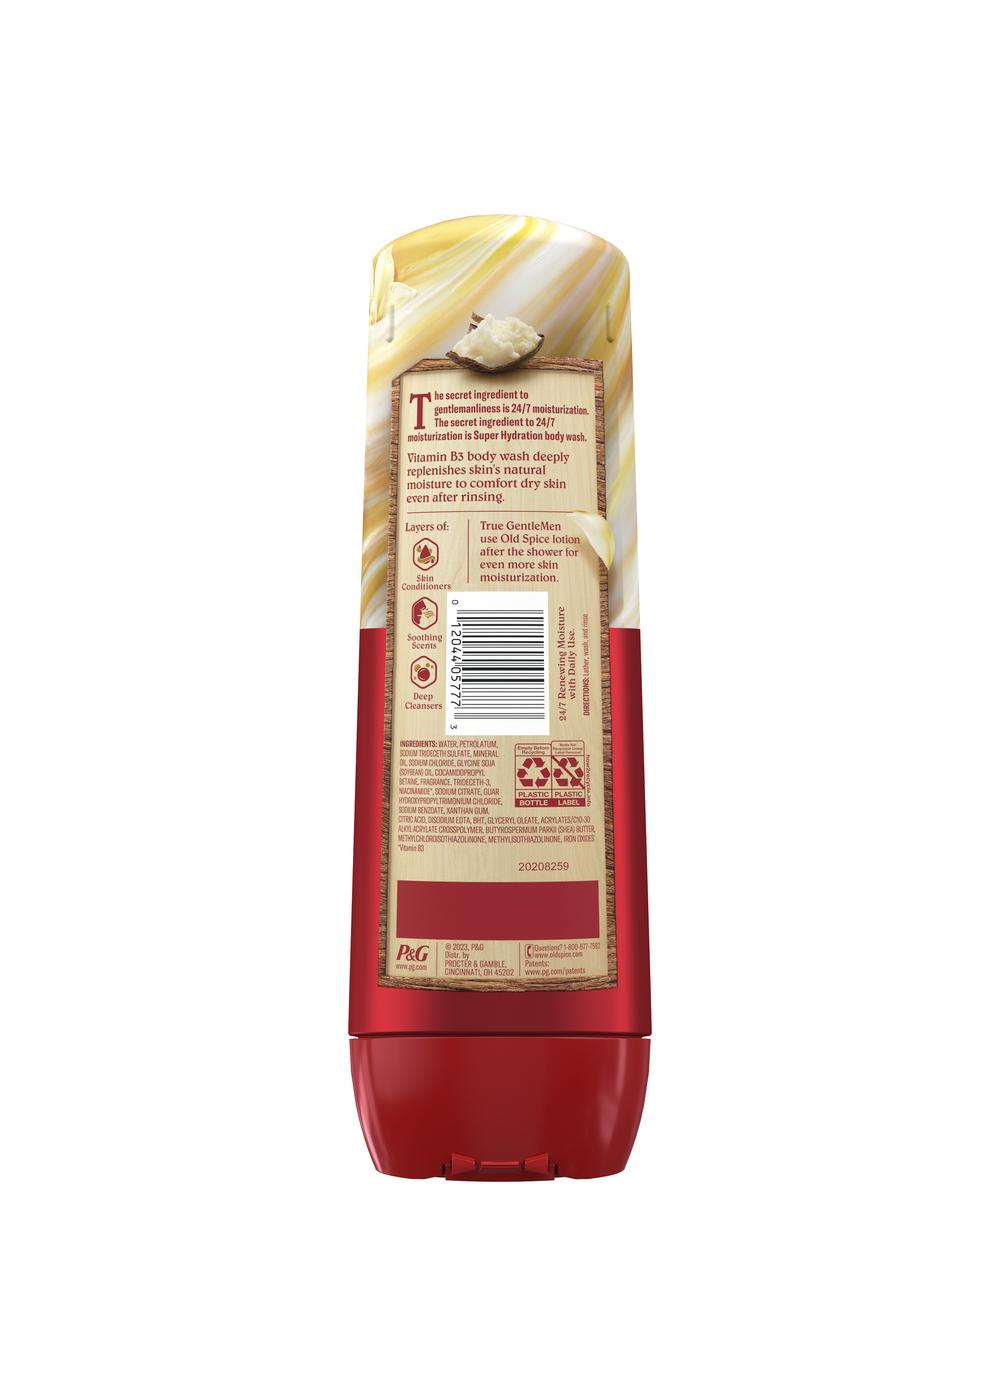 Old Spice GentleMan's Body Wash - Vanilla + Shea Butter; image 2 of 2